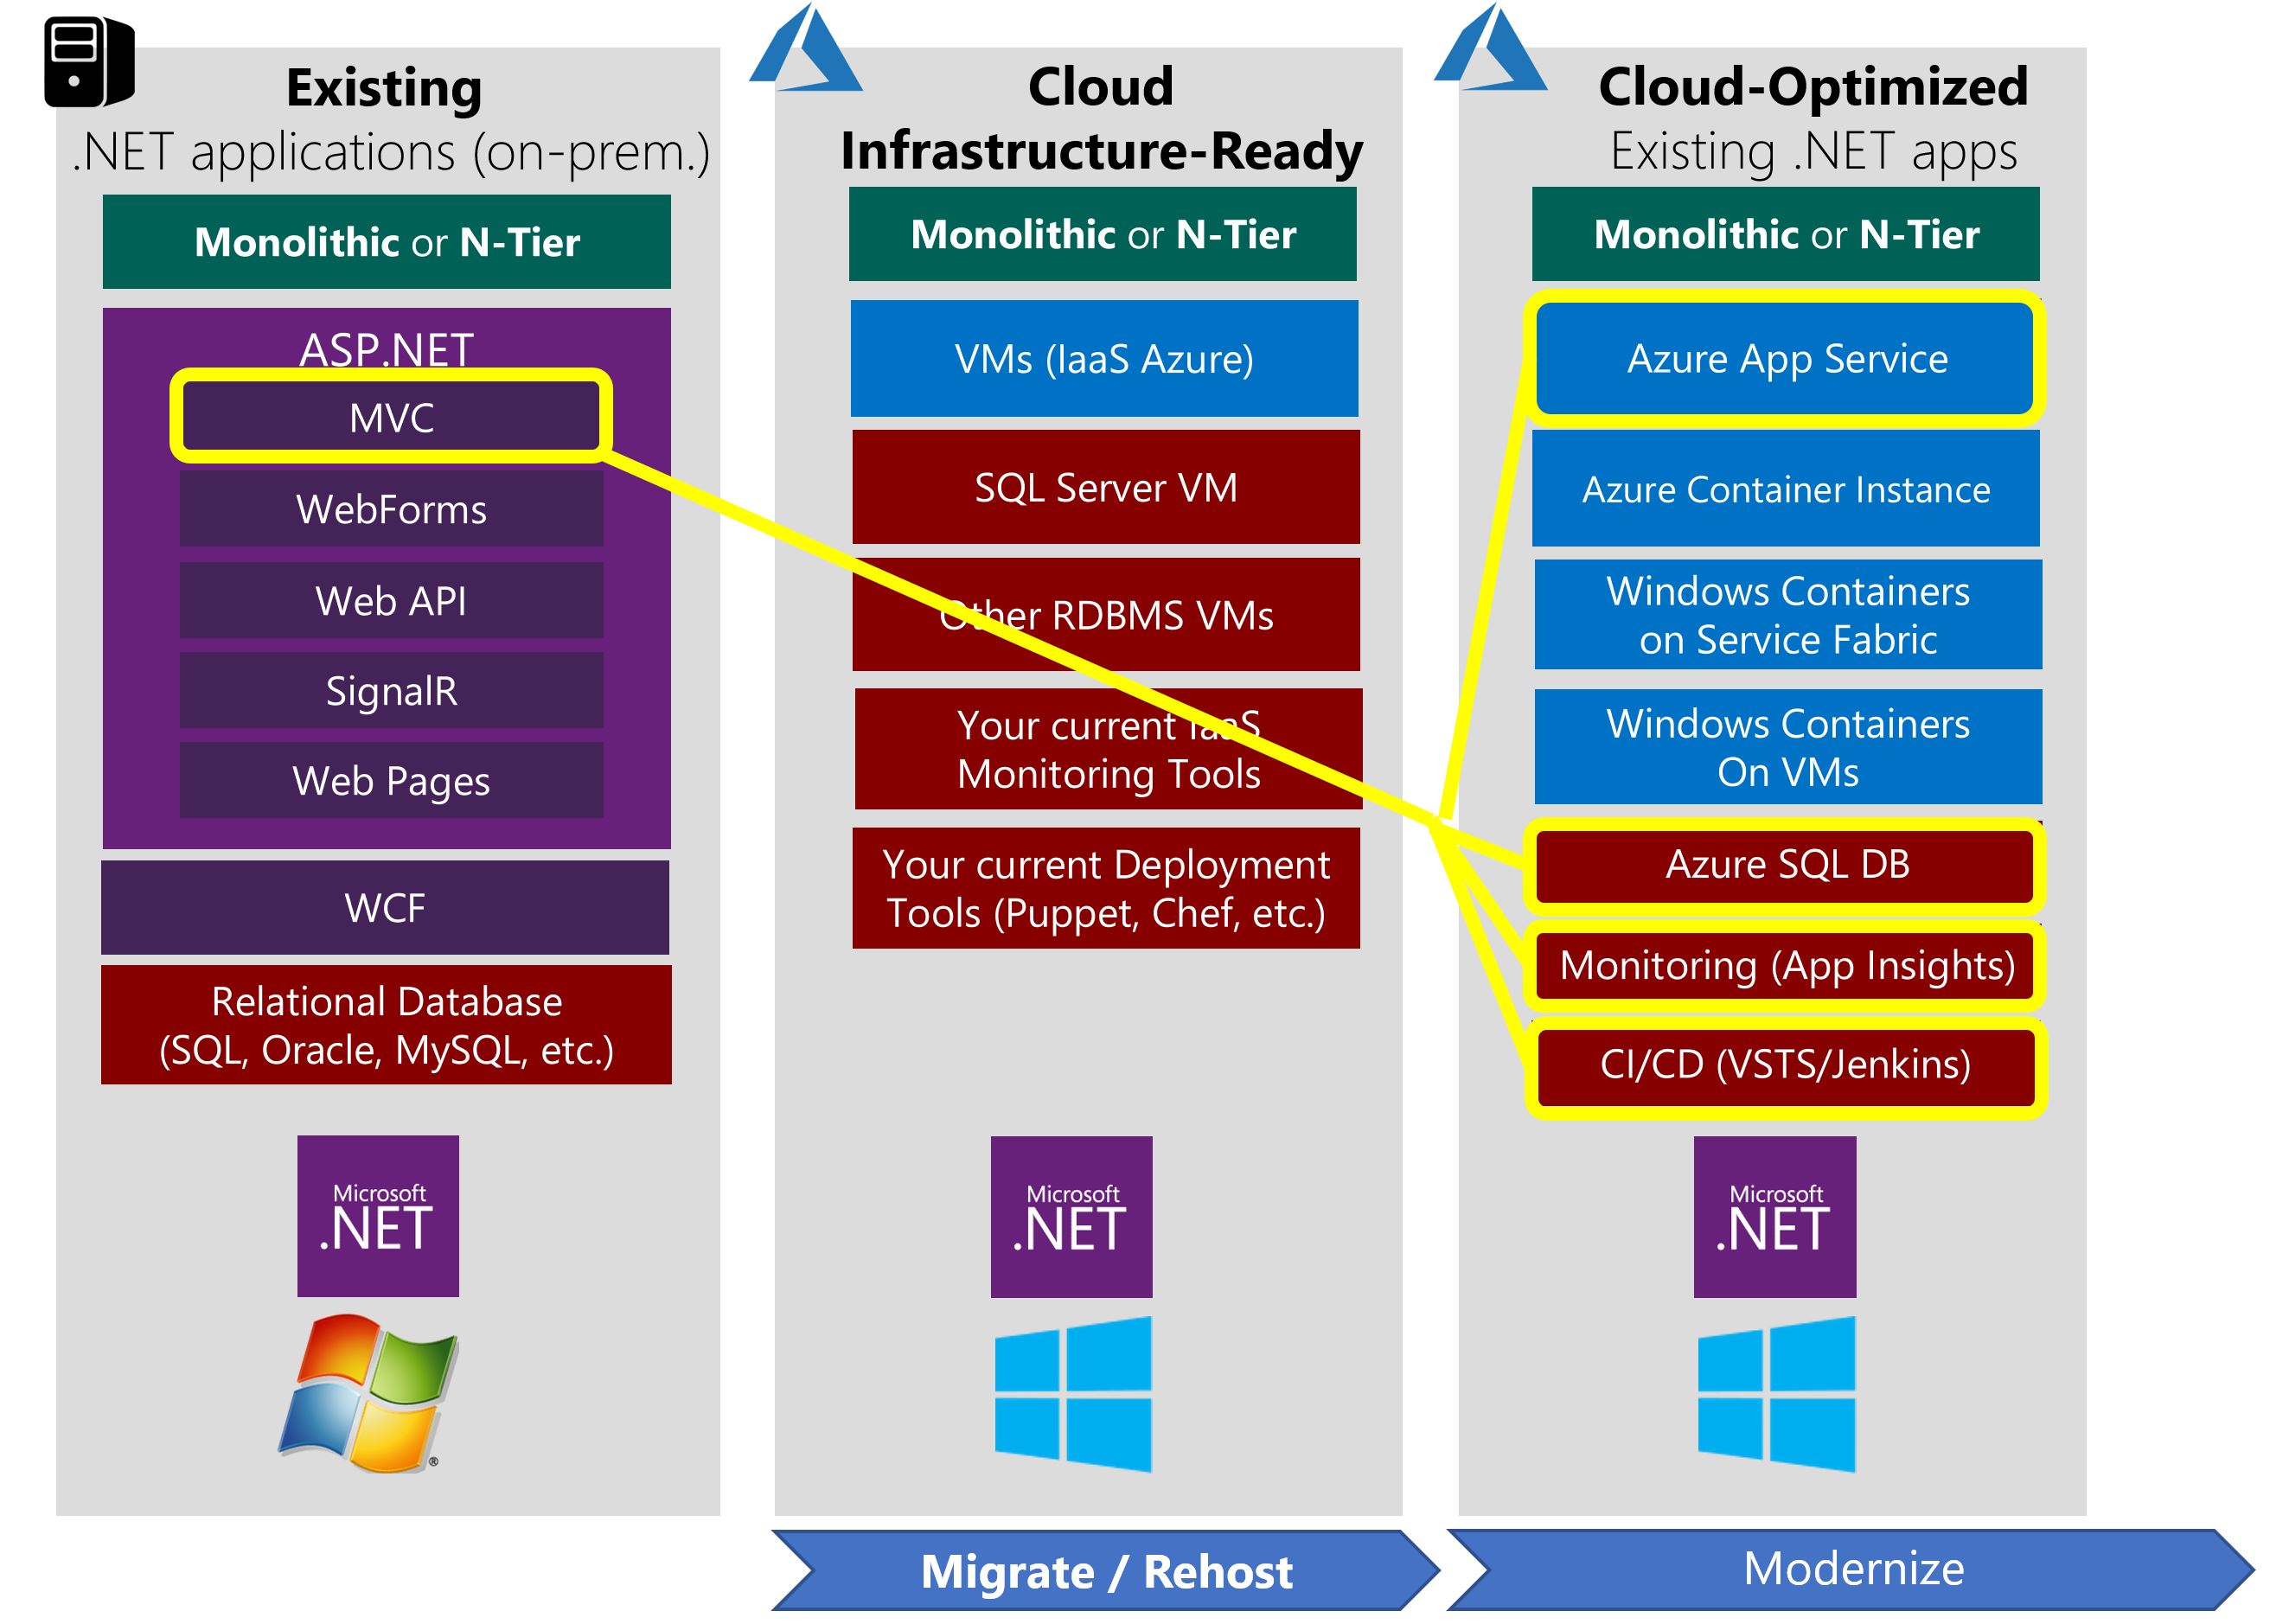 Example Cloud-Optimized apps scenario, with Windows Containers and managed services